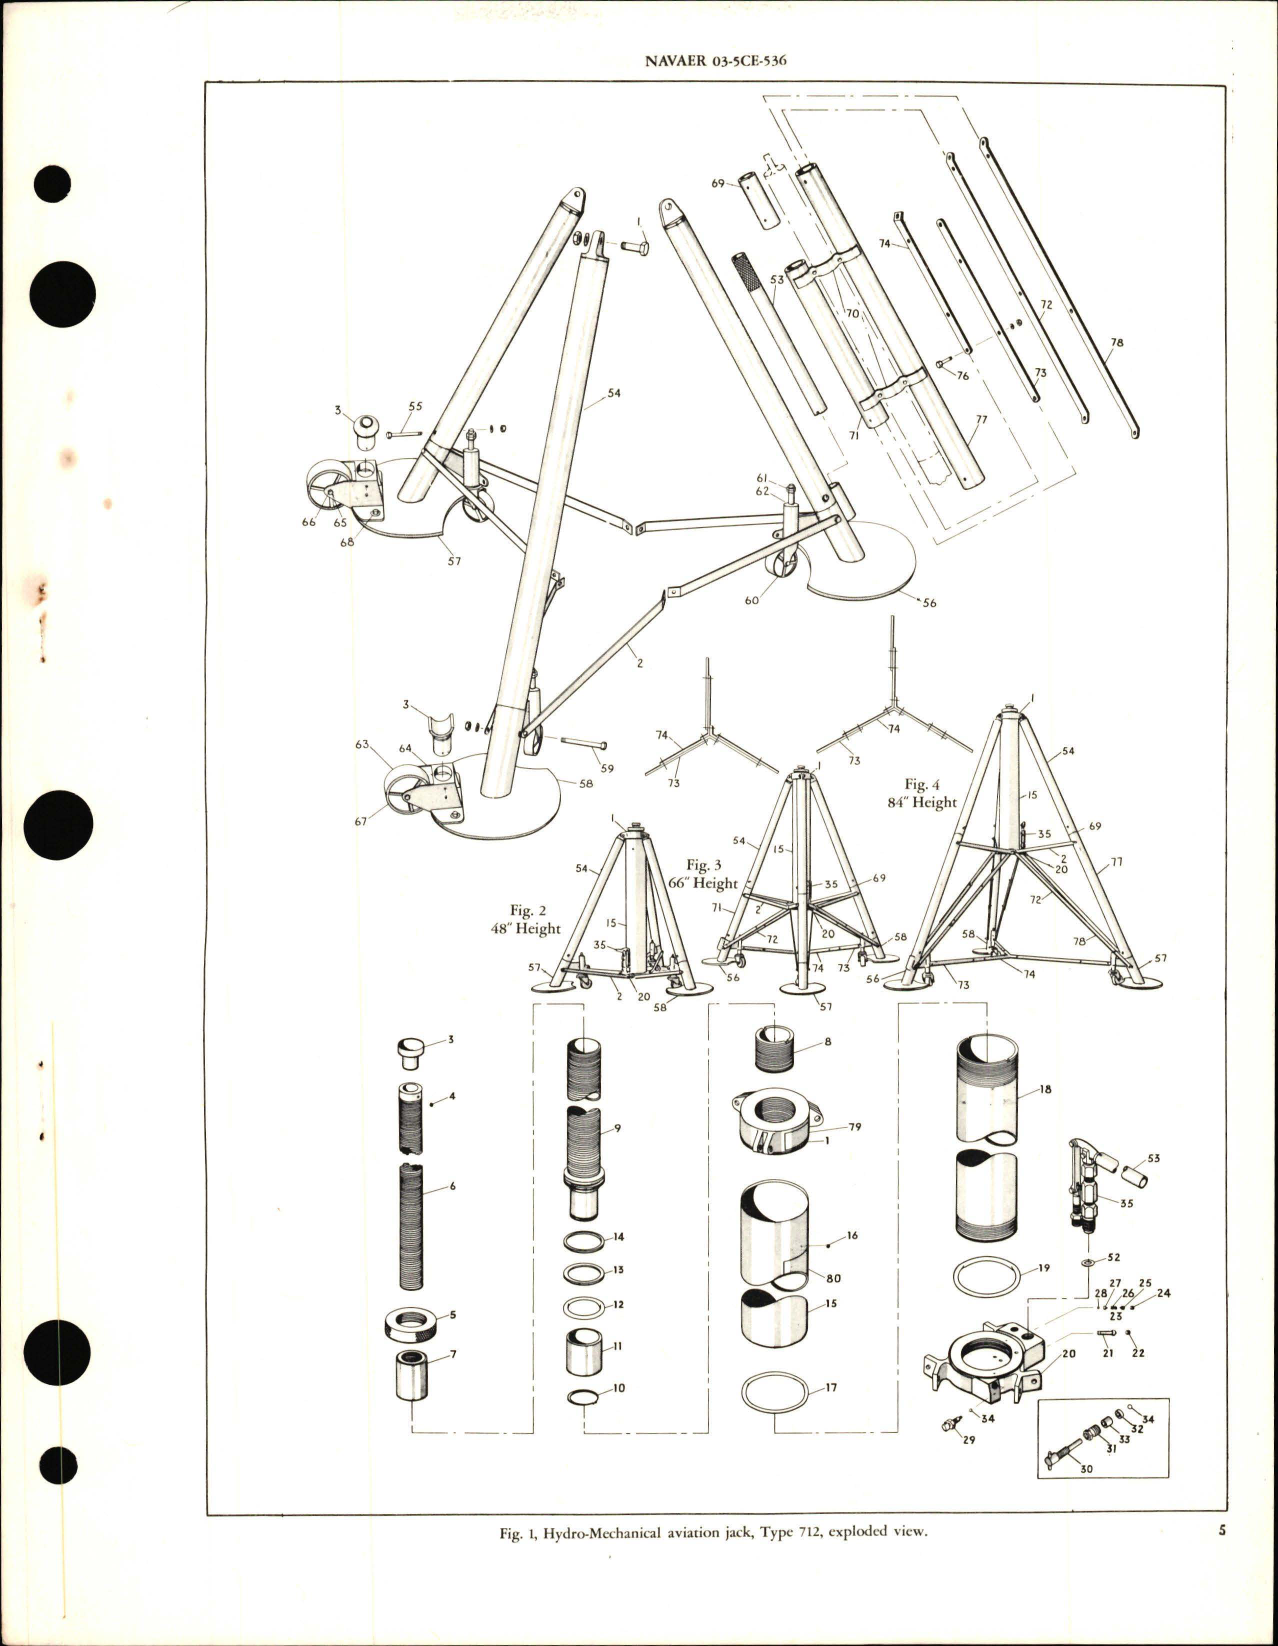 Sample page 5 from AirCorps Library document: Operations, Service and Overhaul Instructions w Parts Breakdown for Hydro Mechanical Aviation Jack, Single Stage Type 712 